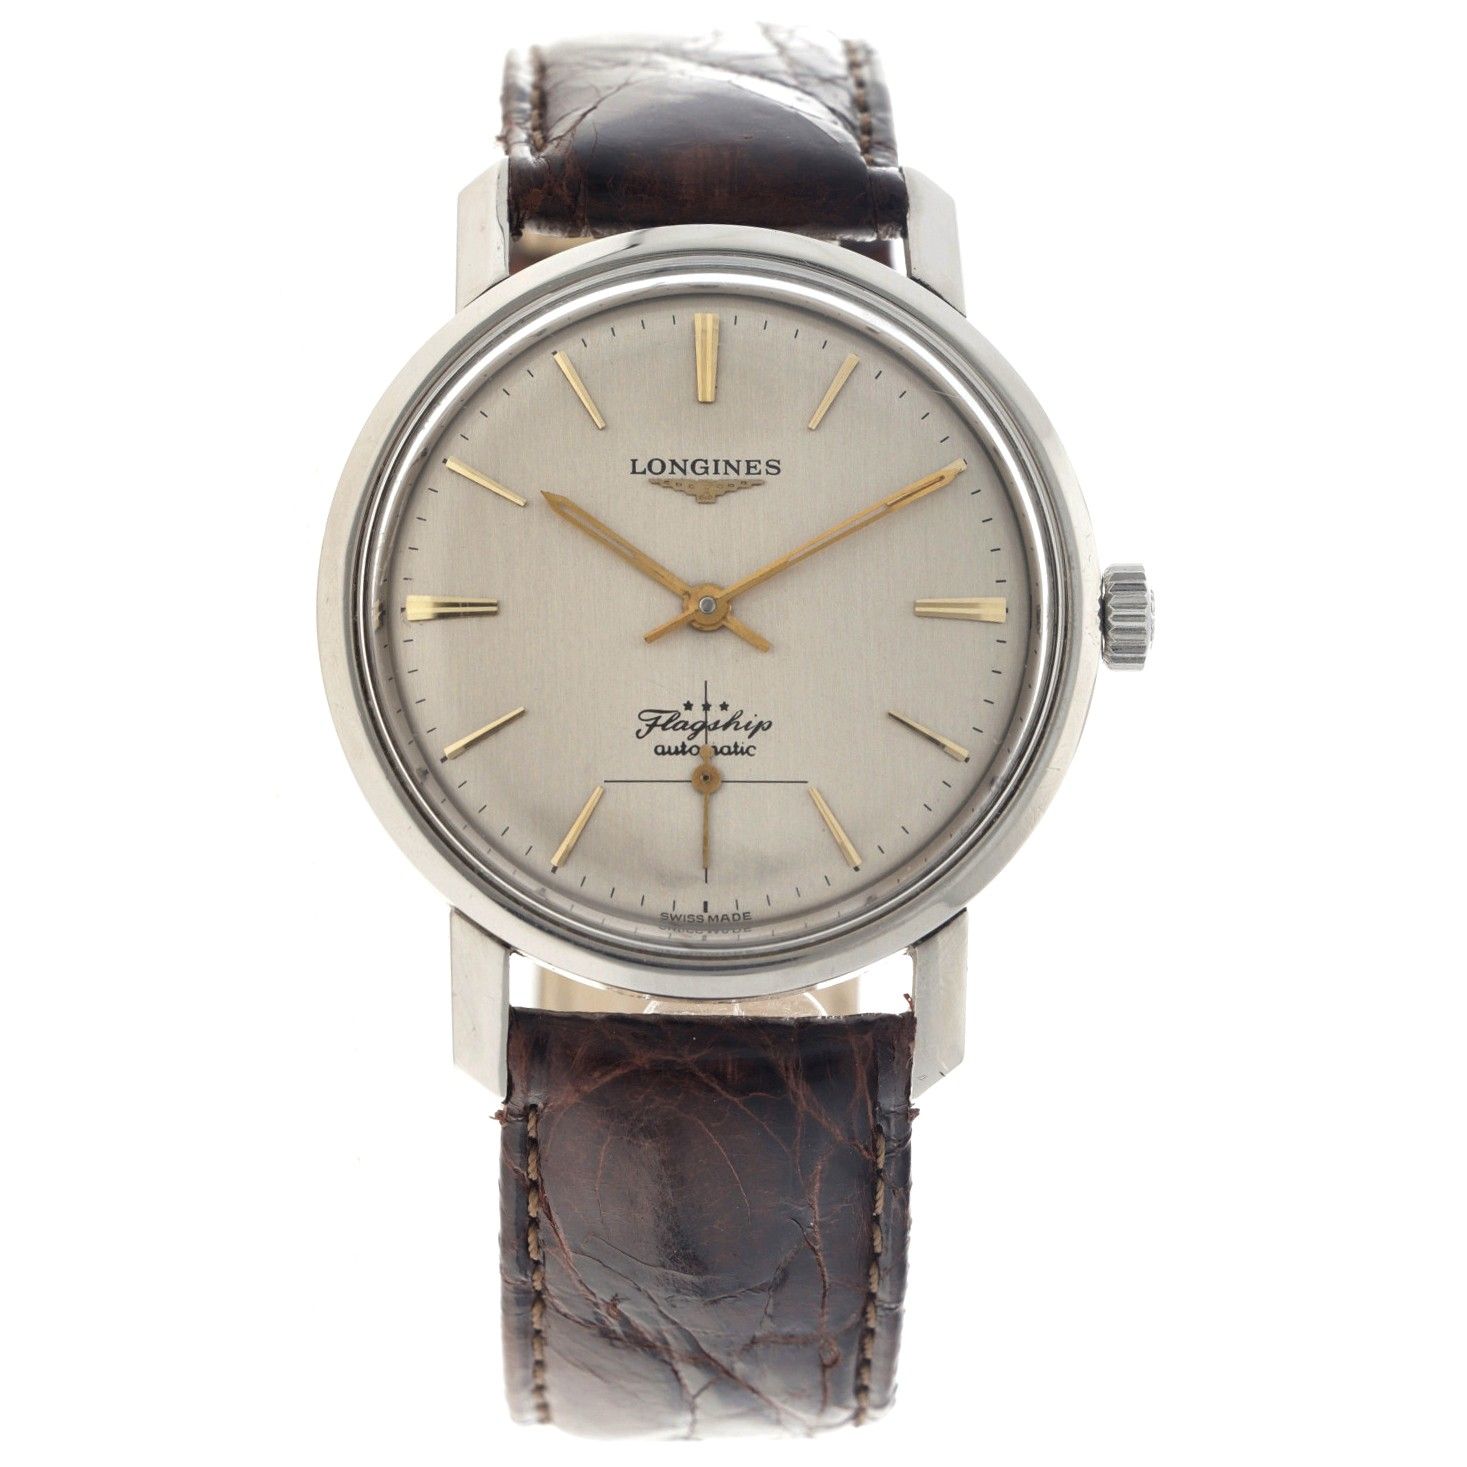 Longines Flagship 3102-1 - Men's watch - approx. 1960. Gehäuse: Stahl - Armband:&hellip;